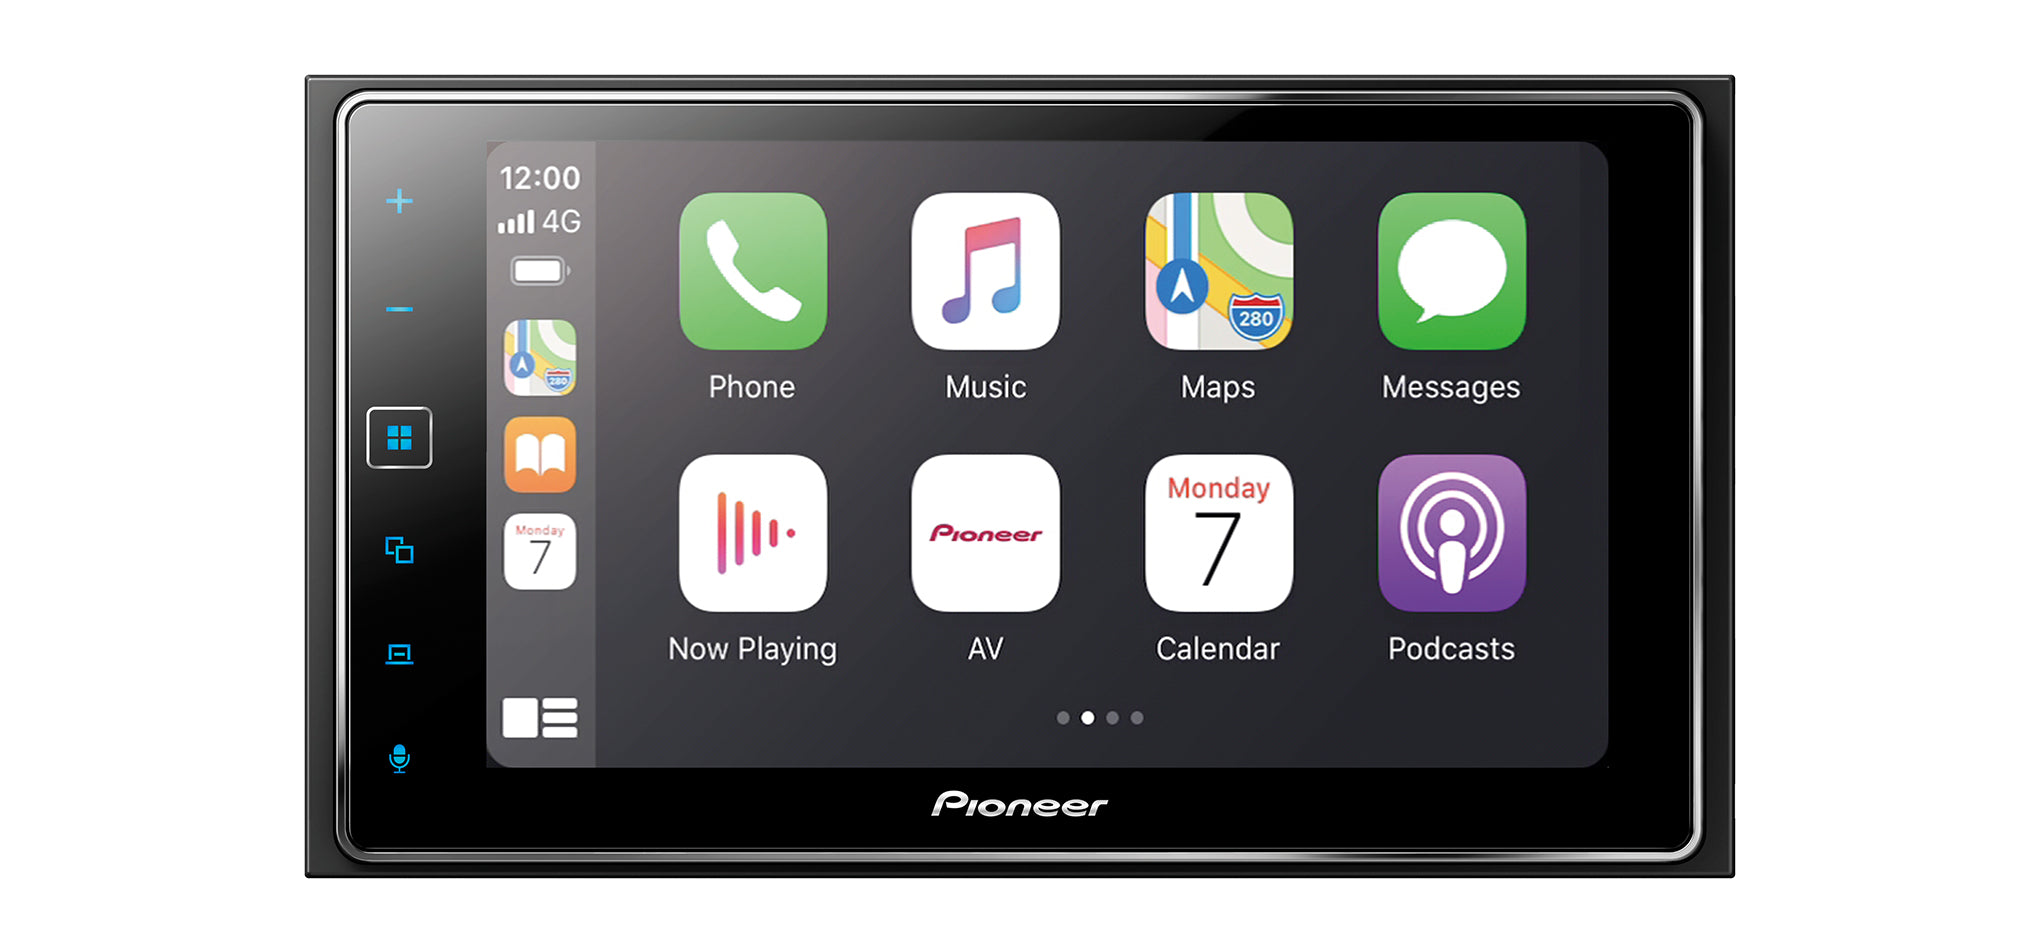 Pioneer SPH-DA130DAB 2-Din 6.2" Capacitive touchscreen with Apple CarPlay